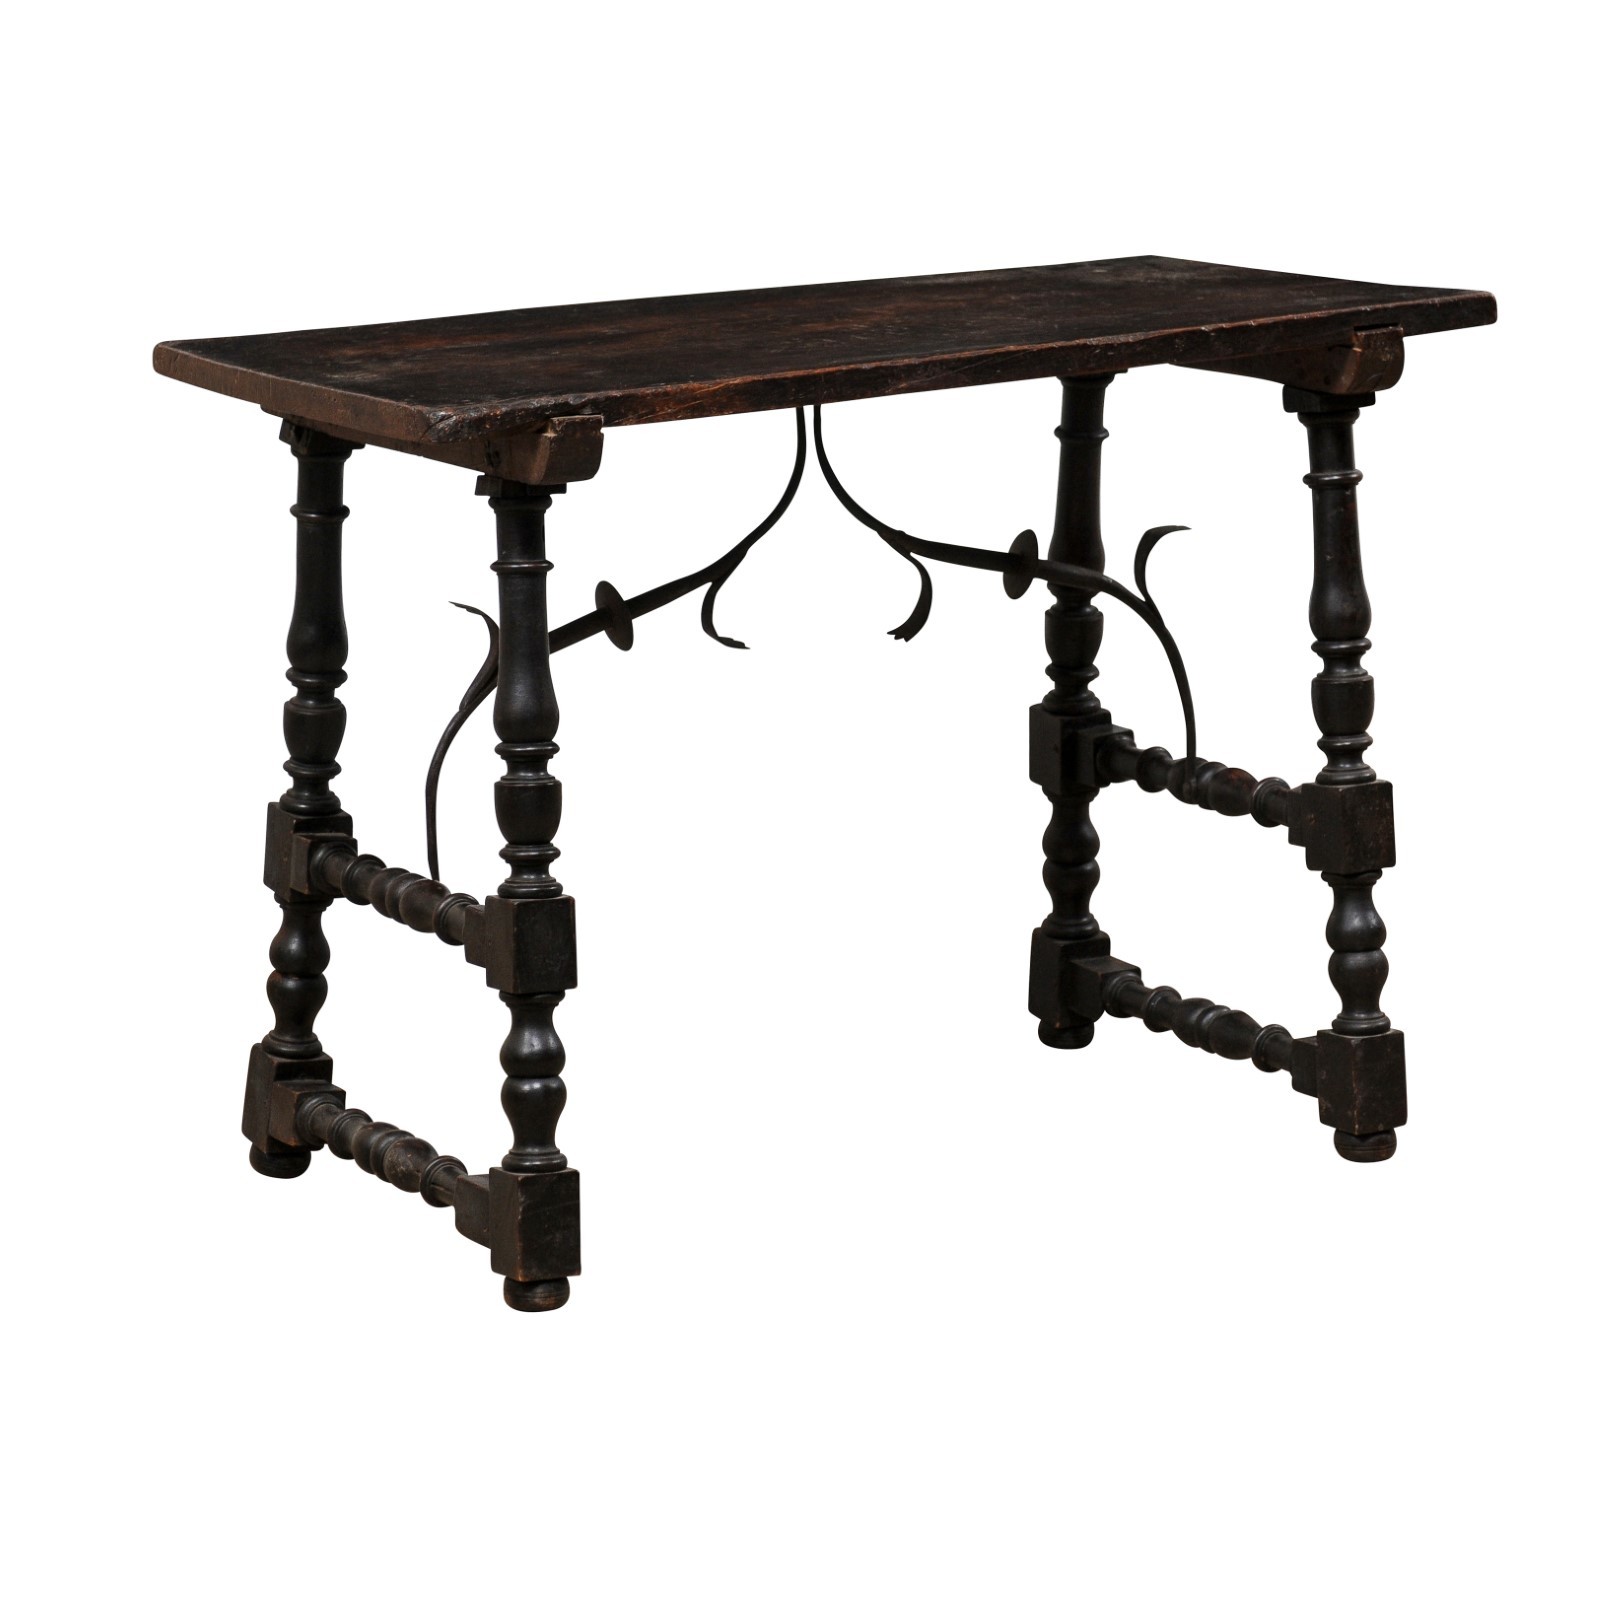 18th C. Italian Table with Iron Stretcher